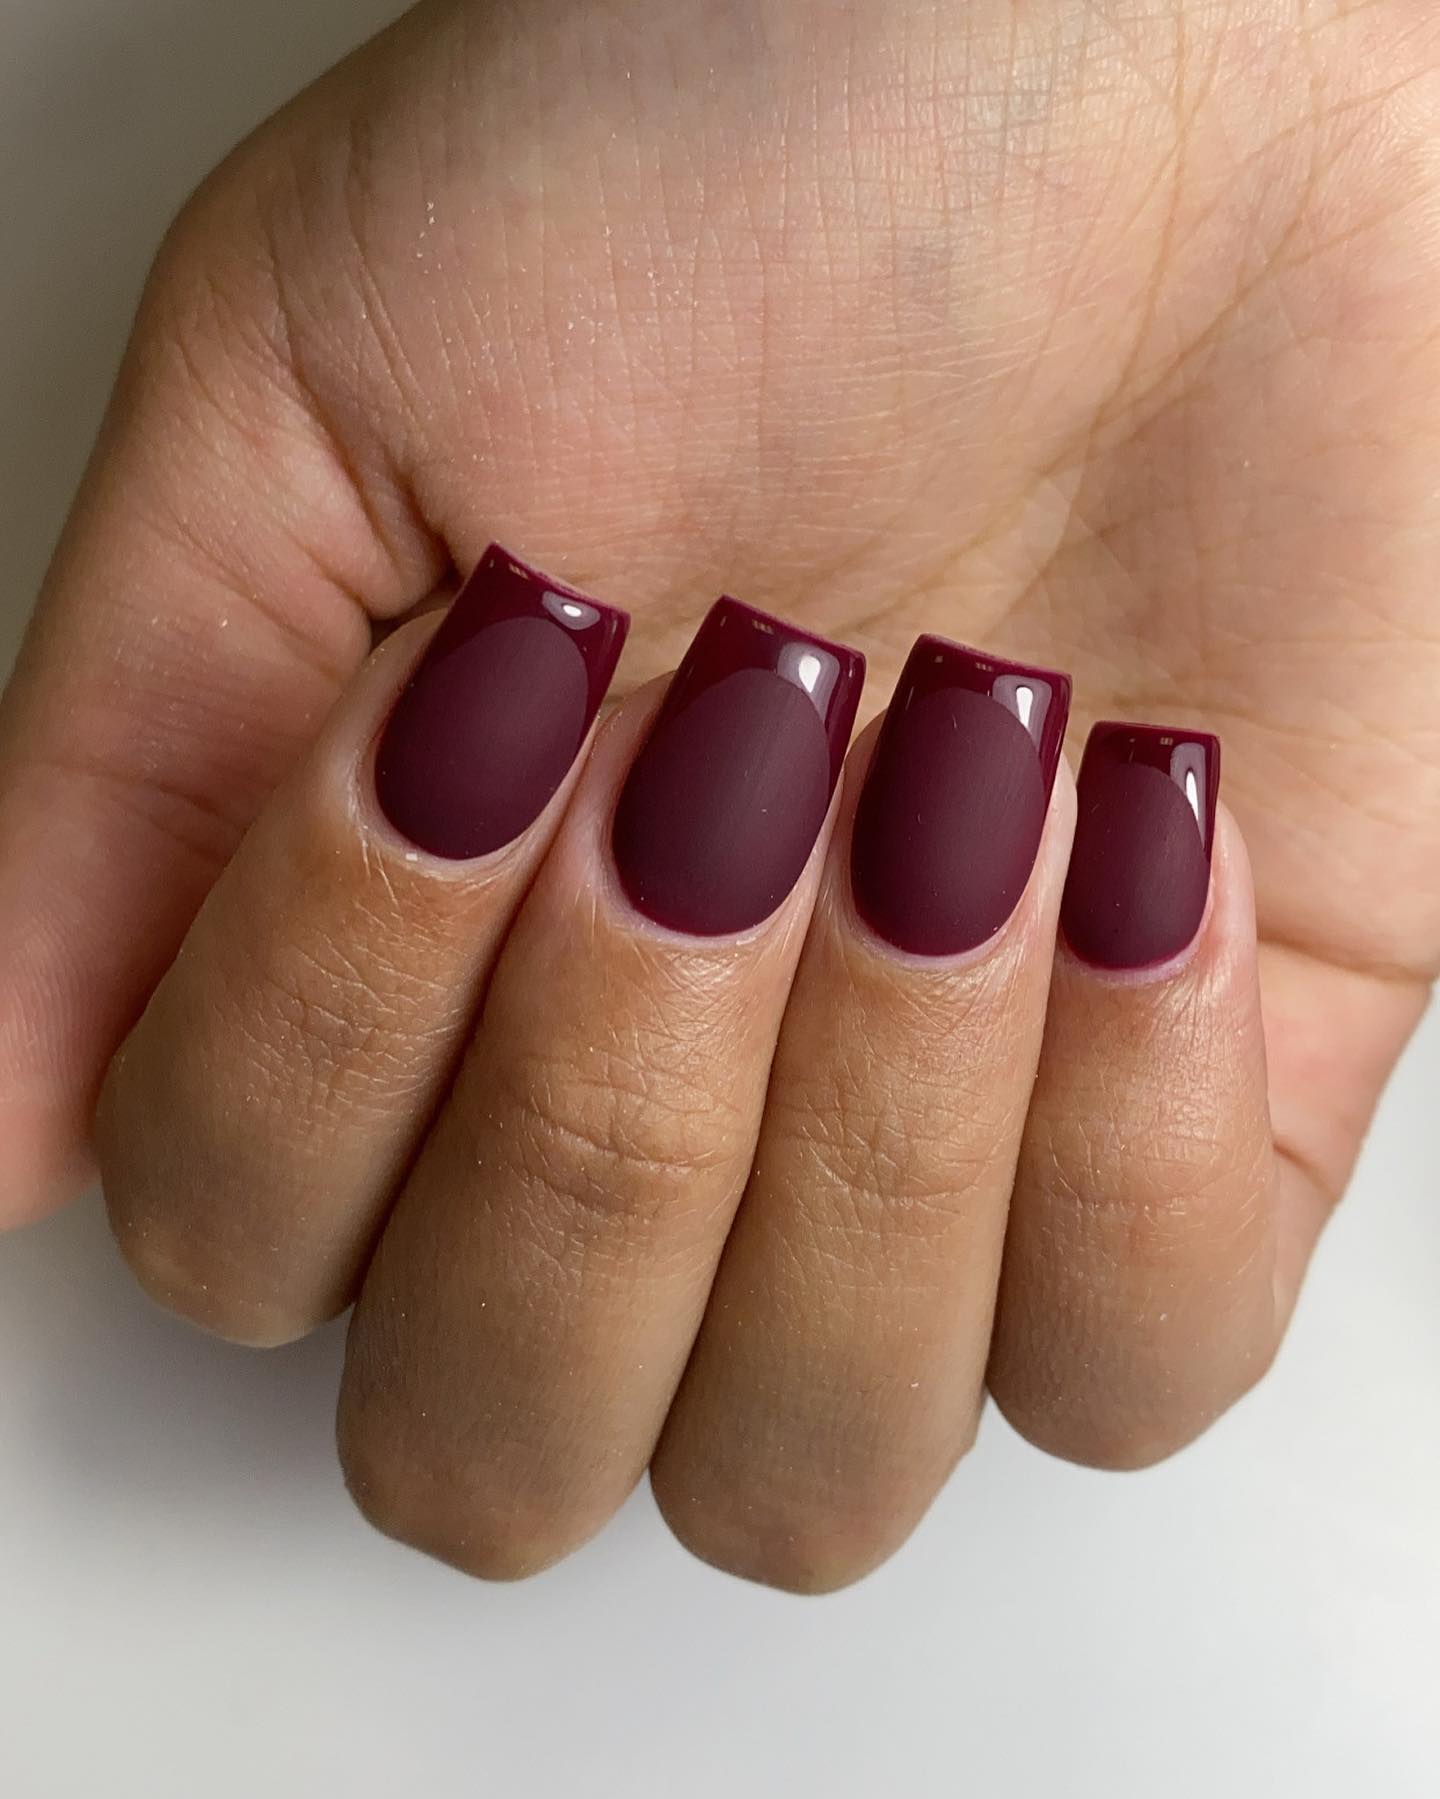 Short Square Matte Burgundy Nails with Glossy Tips